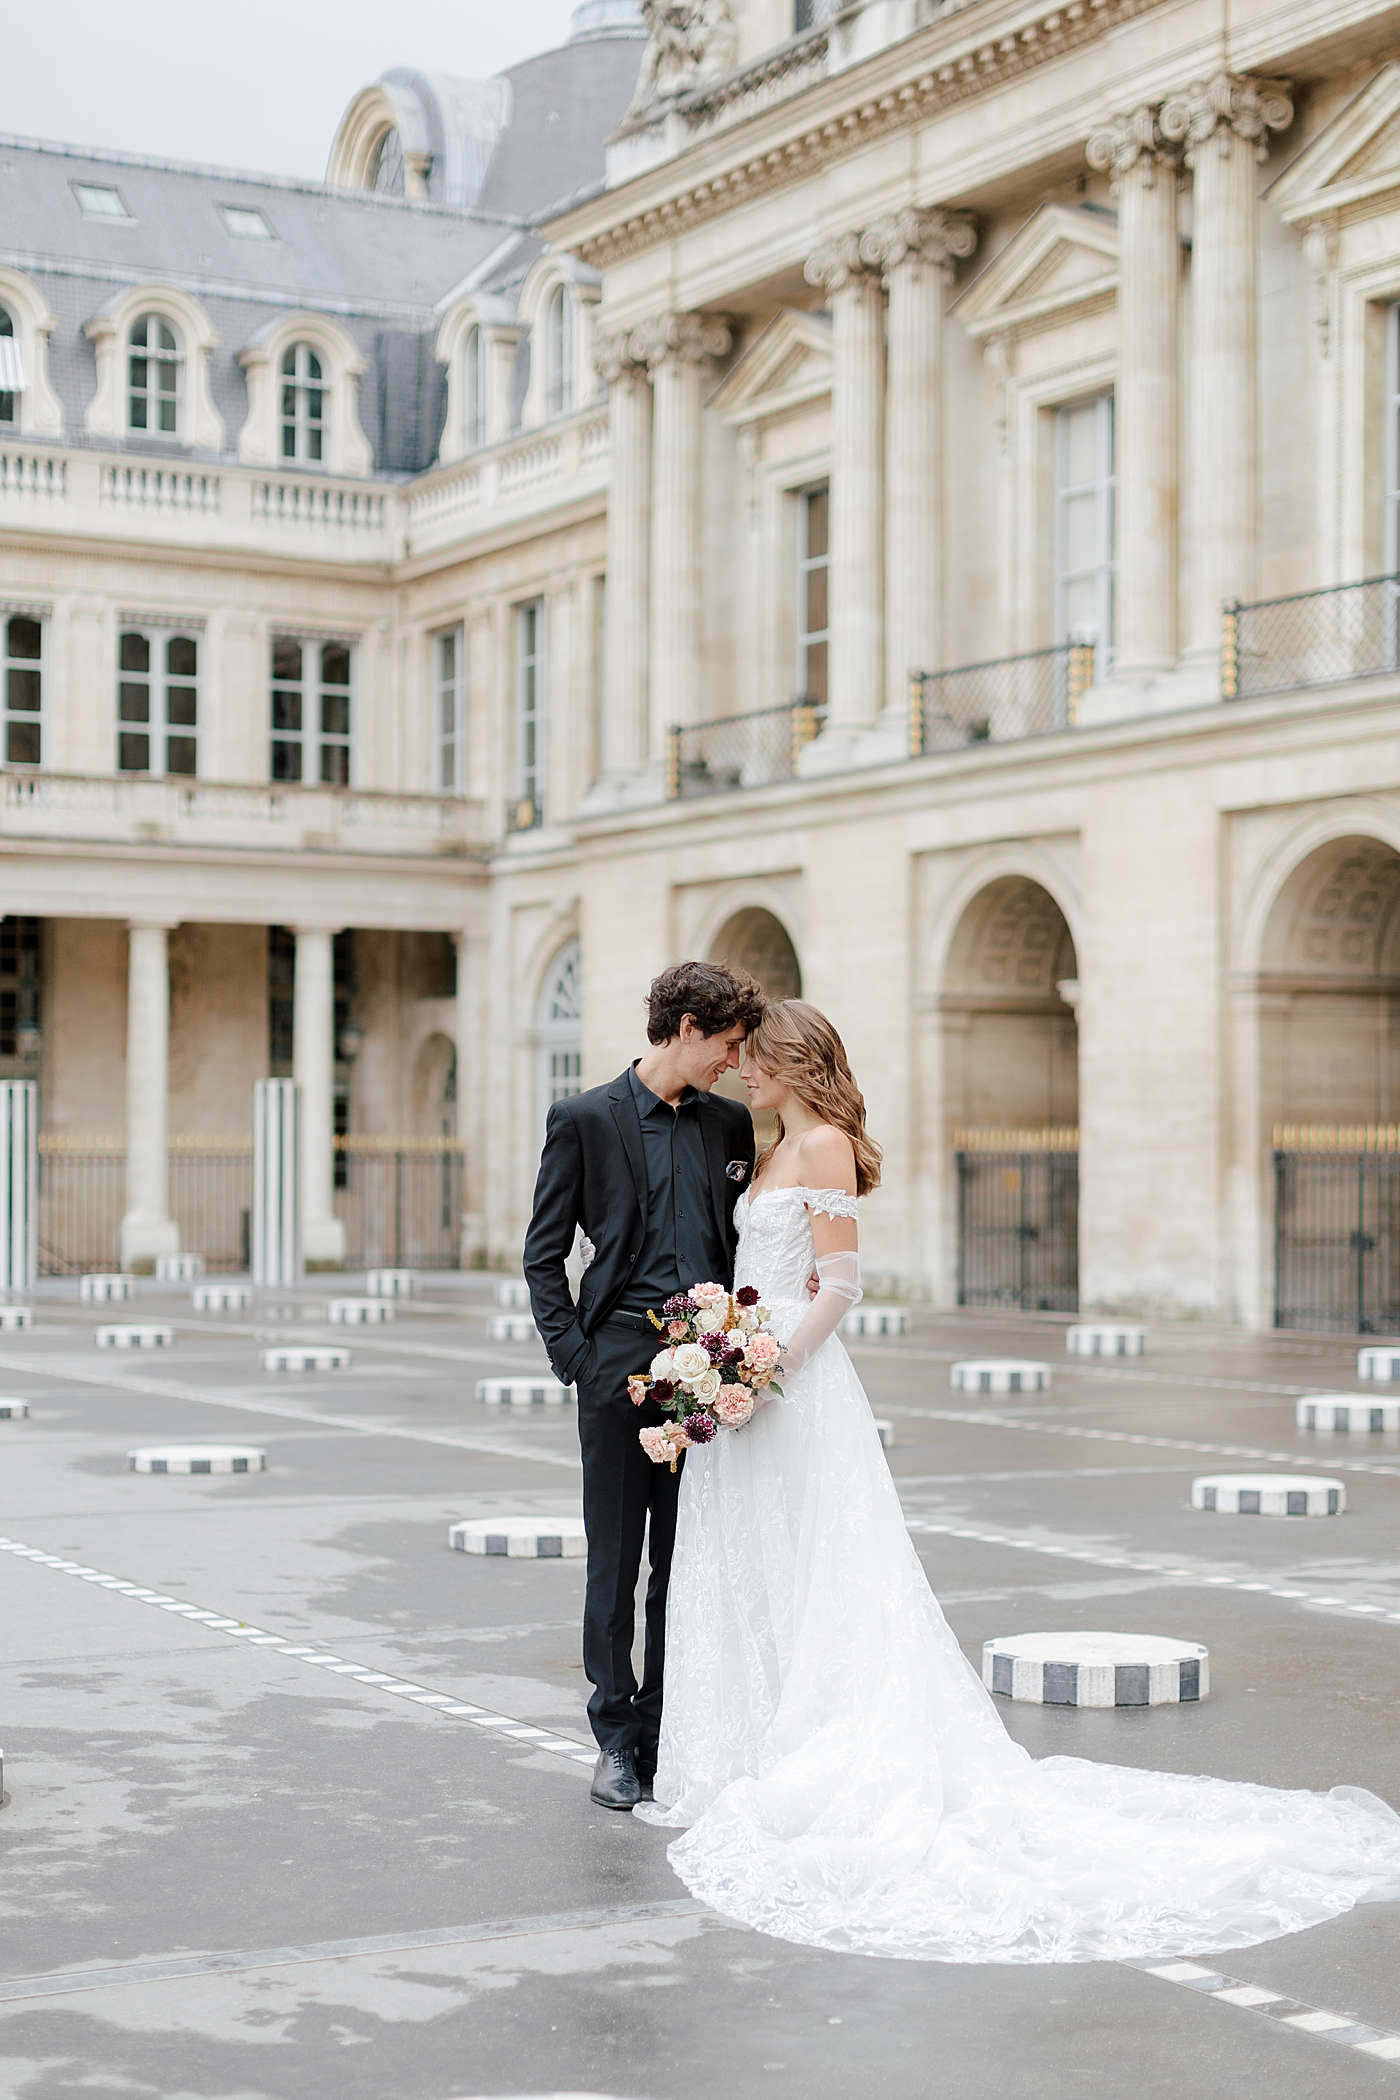 Image of a bride and groom embracing, foreheads together, with a European chateau in the background | Image by Hope Helmuth Photography